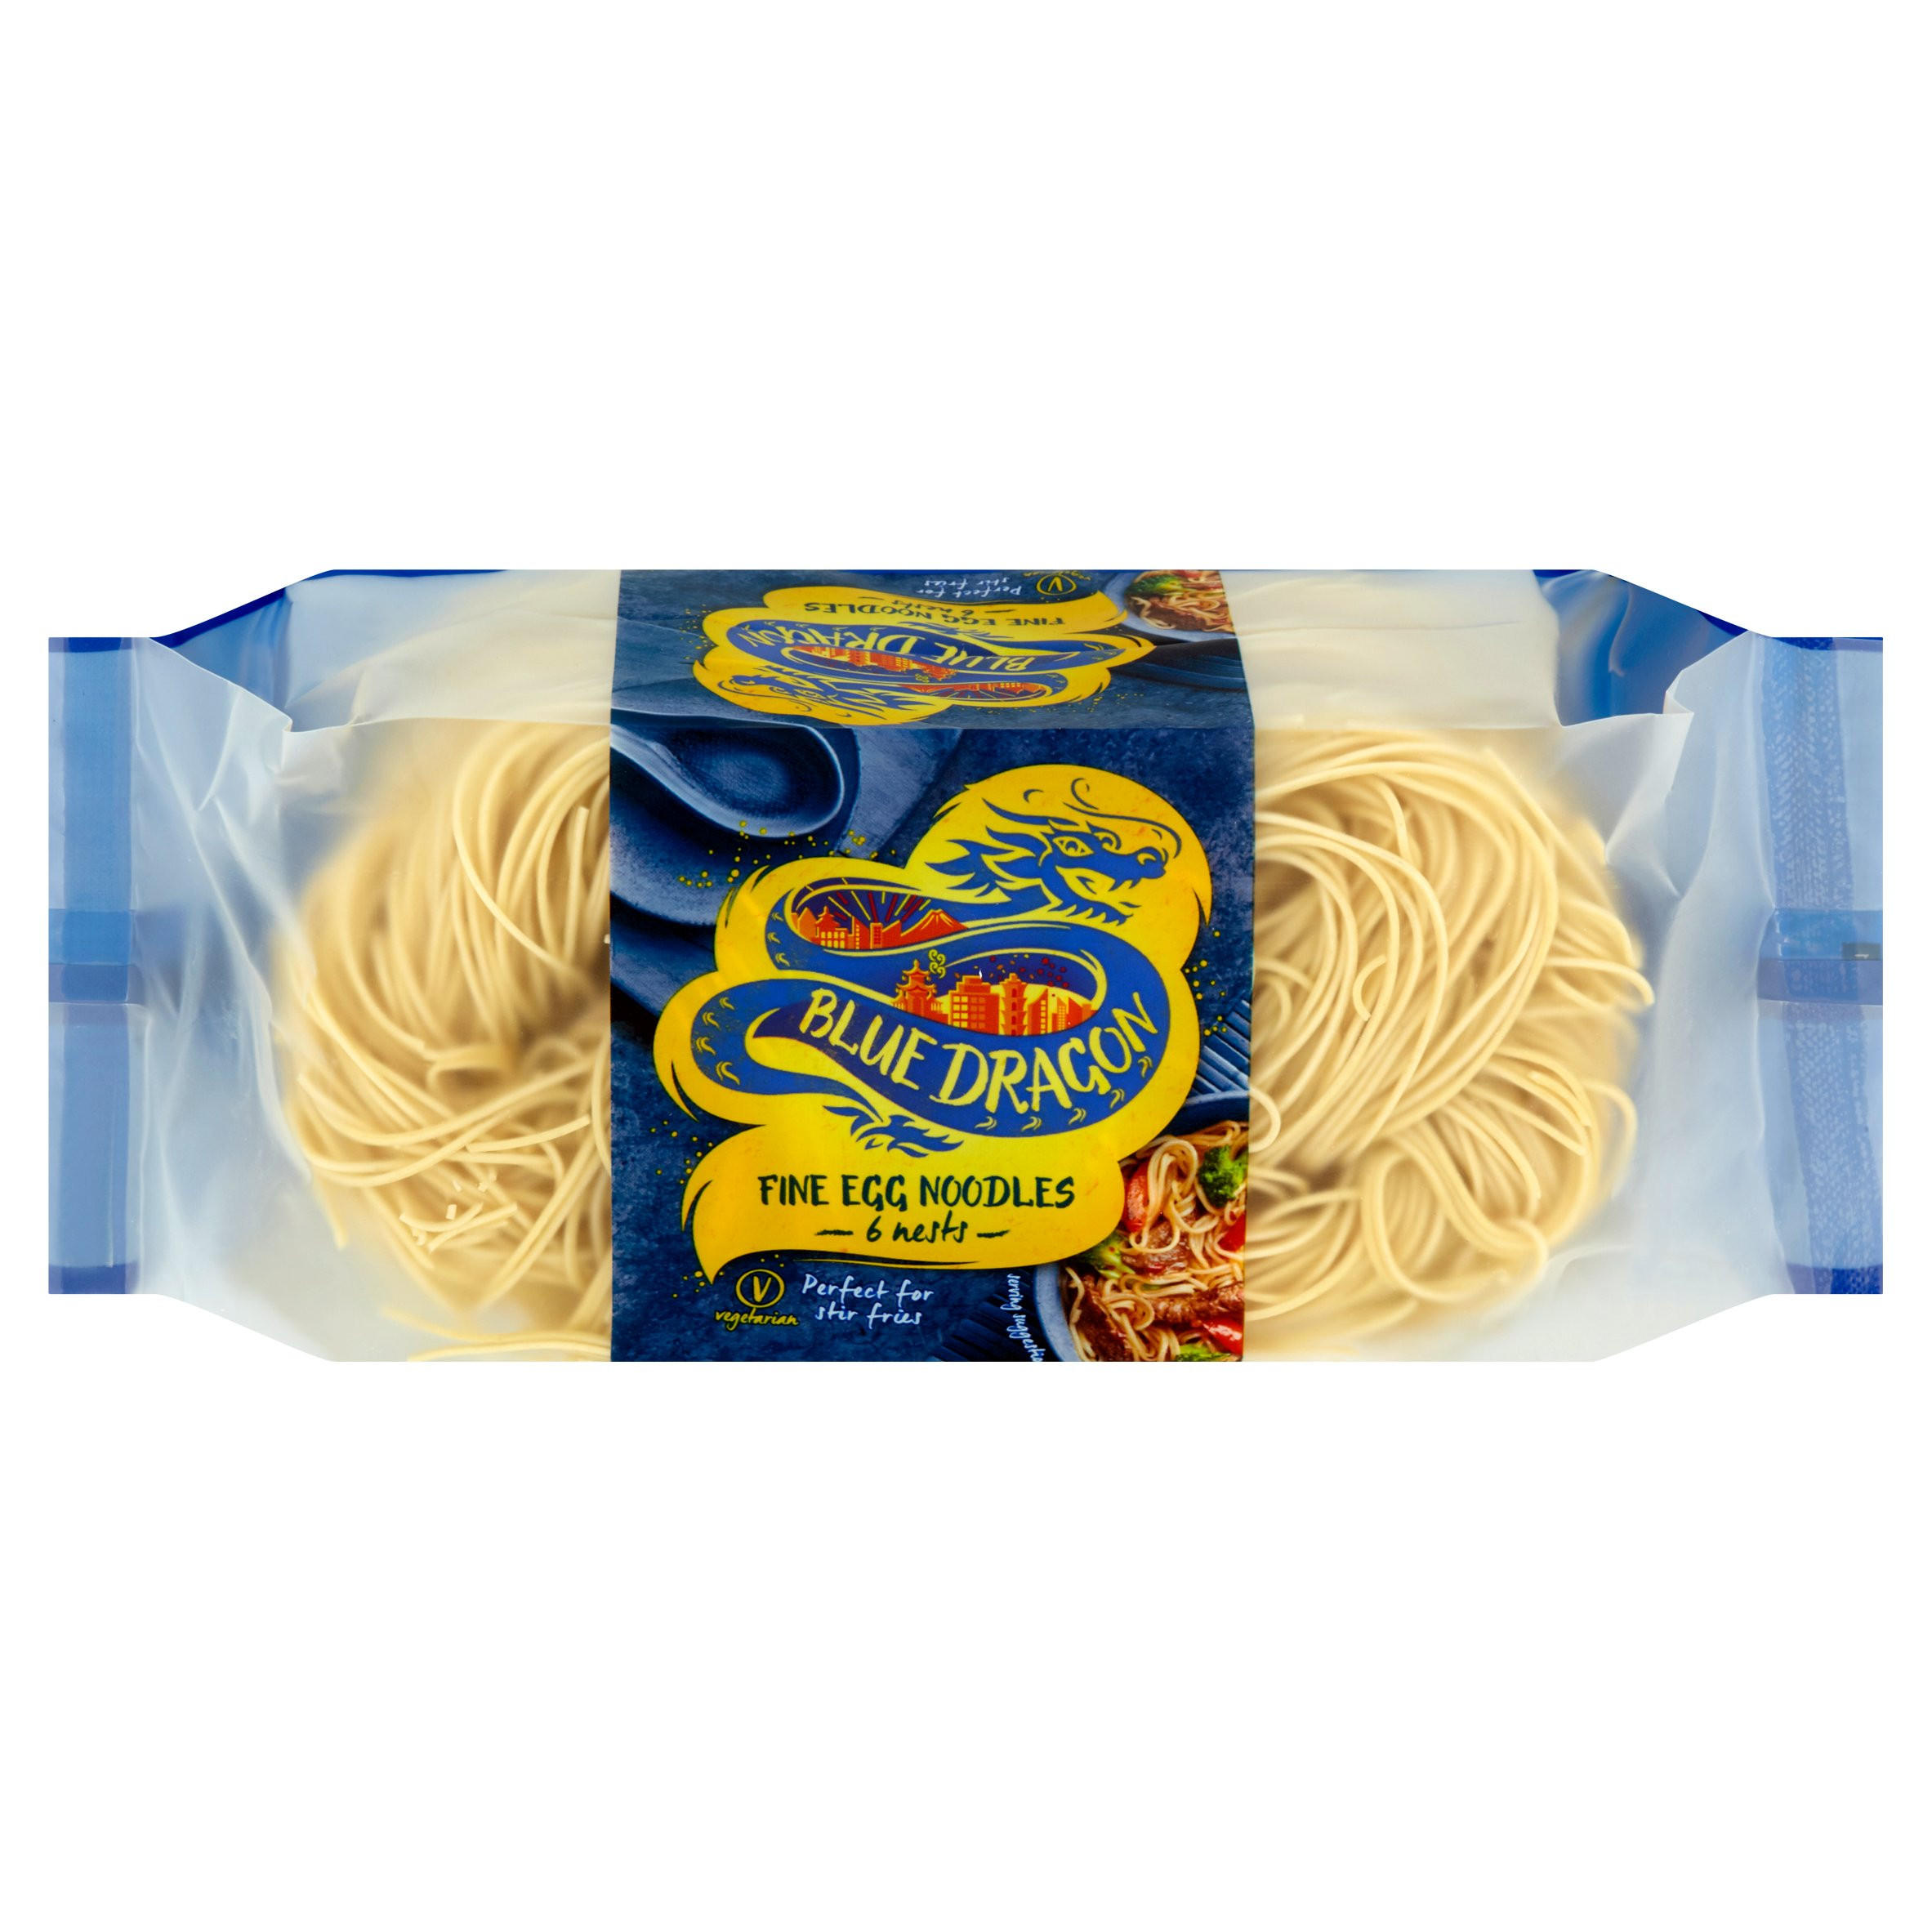 Are blue dragon noodles gluten free